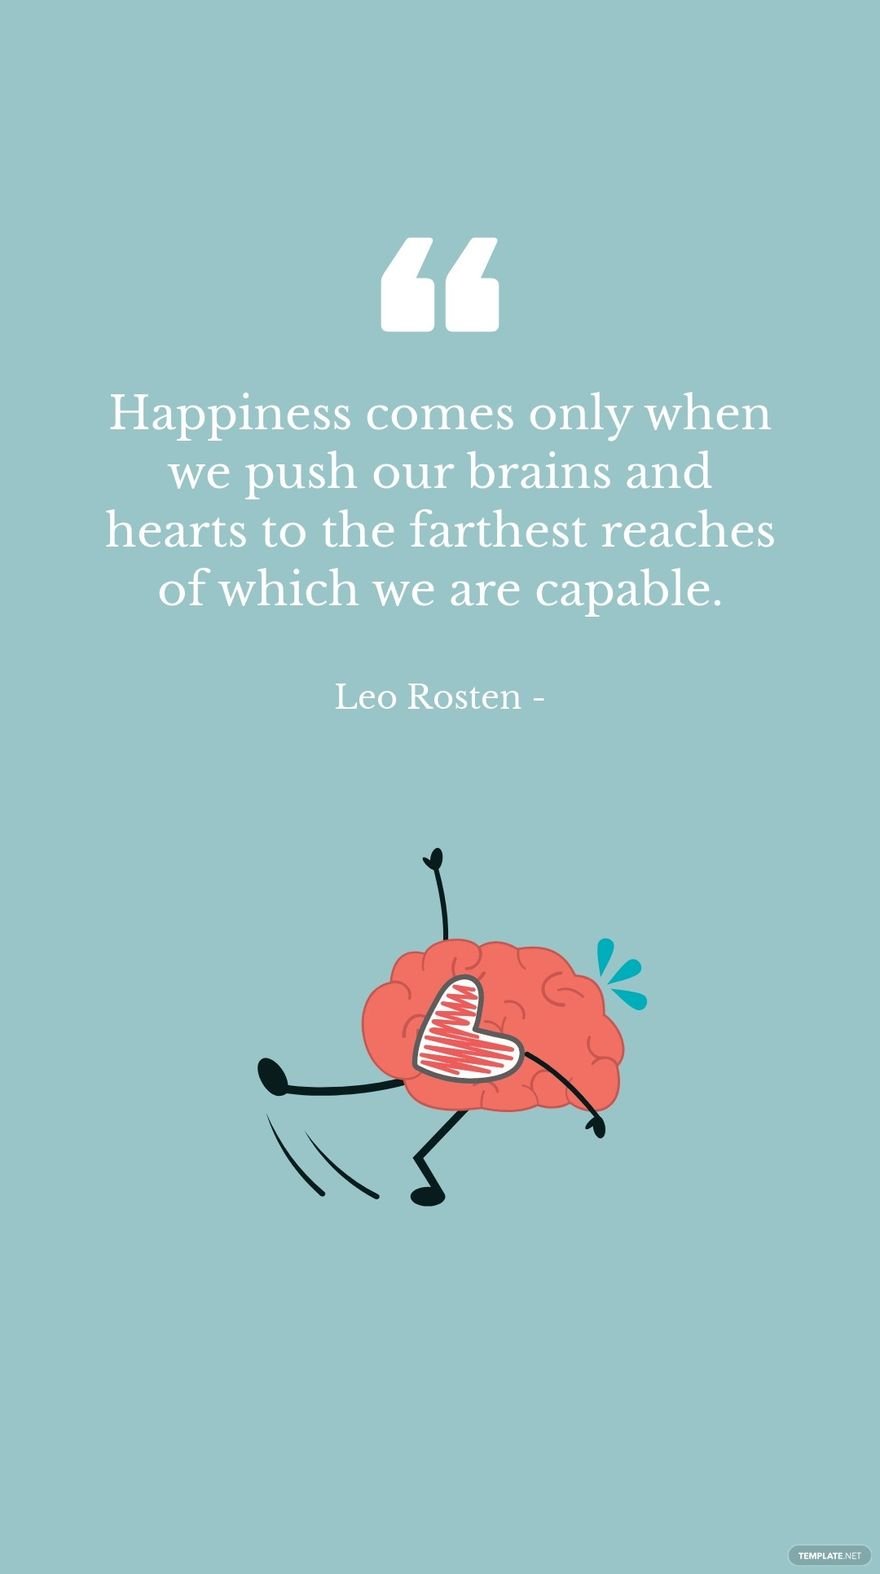 Leo Rosten - Happiness comes only when we push our brains and hearts to the farthest reaches of which we are capable.